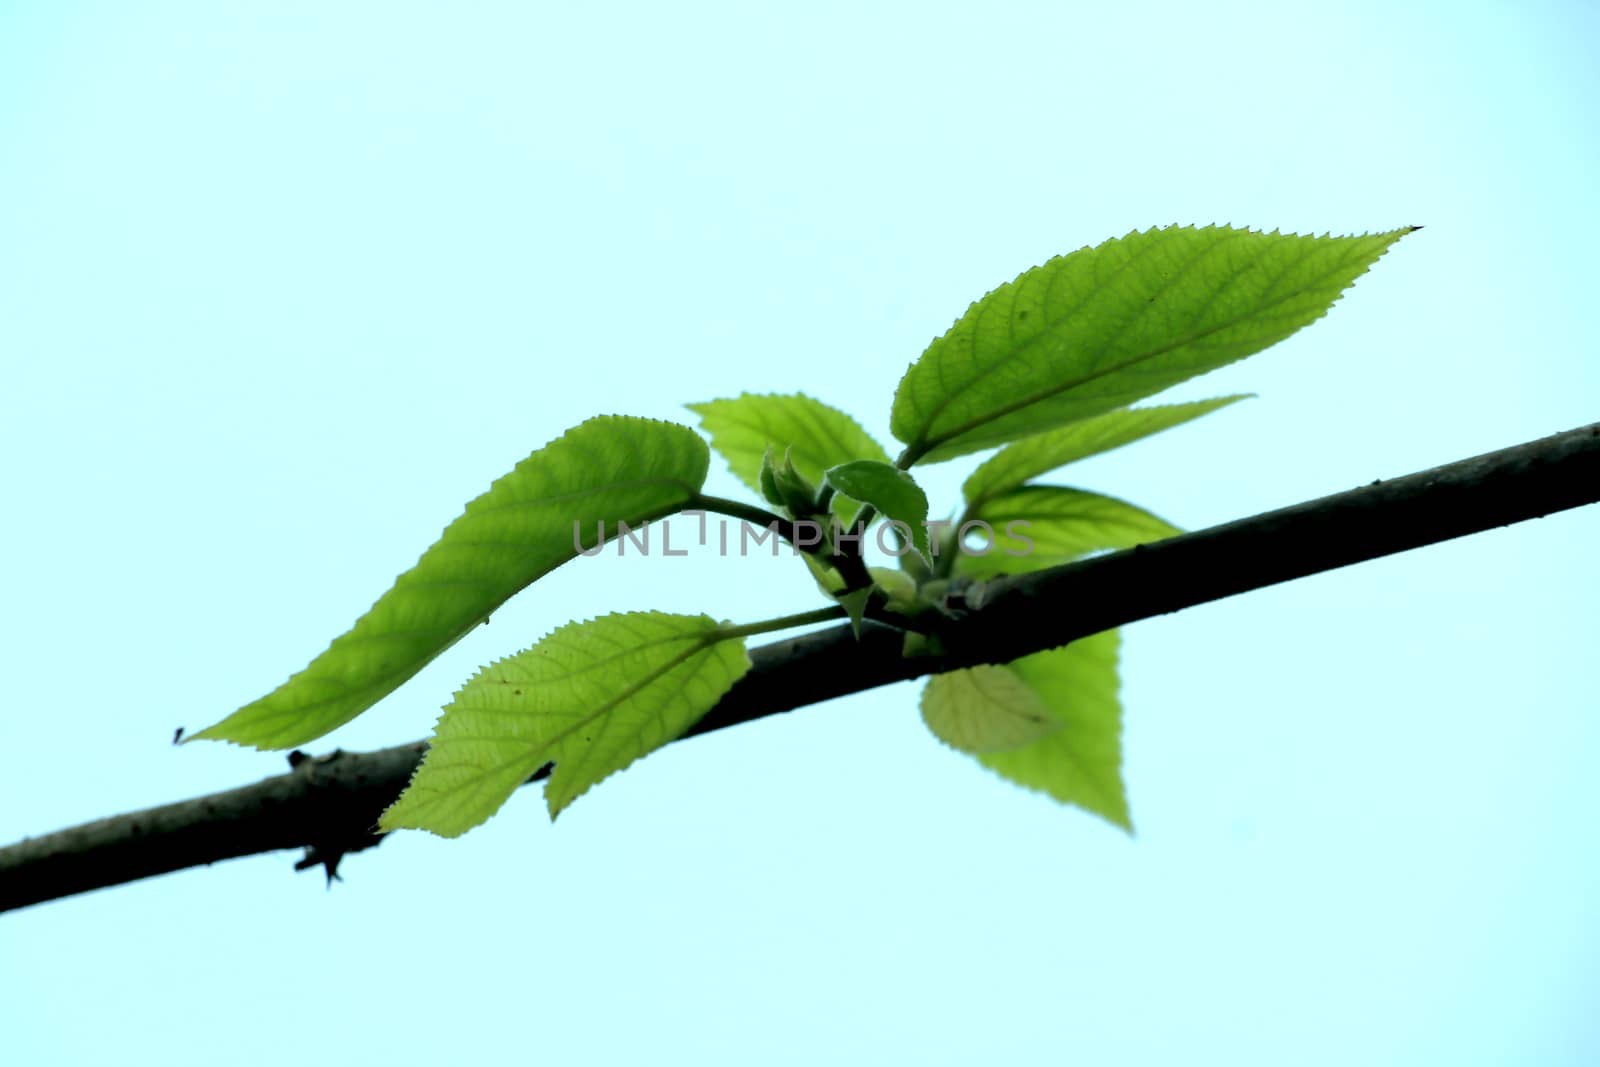 Leaf shoots from the branches.